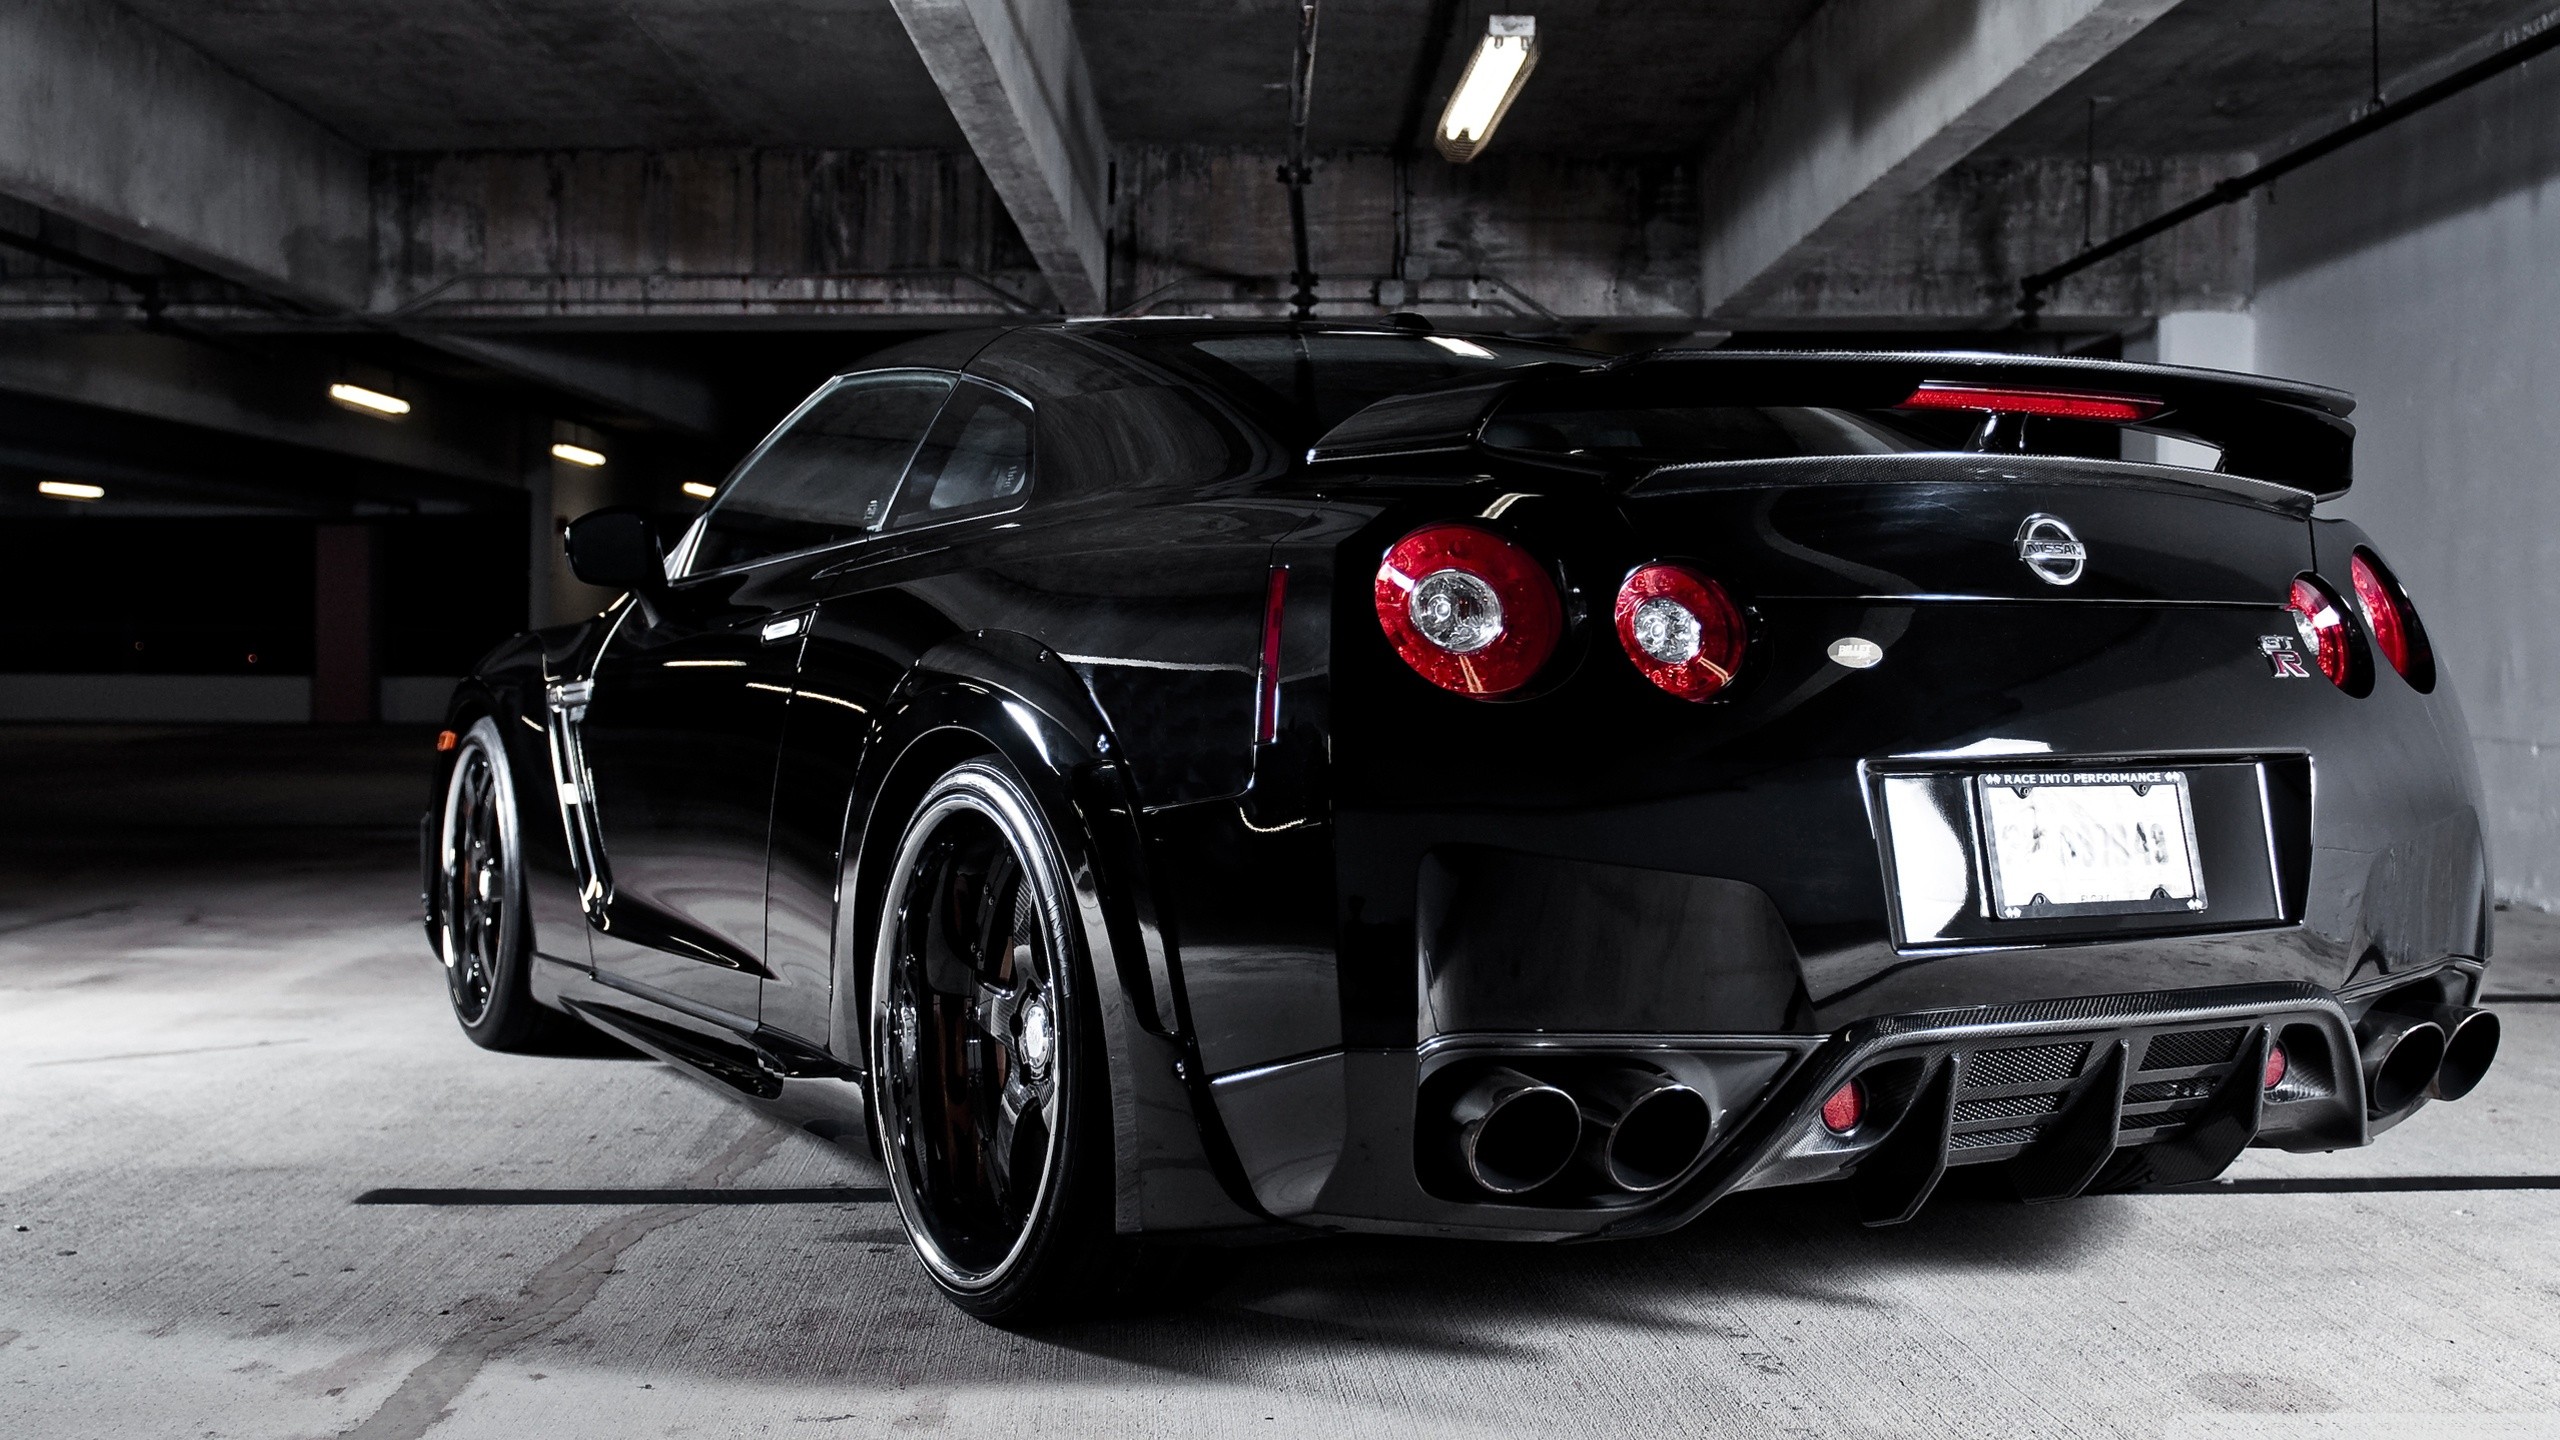 General 2560x1440 car sport Nissan Nissan GT-R tuning vehicle black cars taillights licence plates rear view Japanese cars